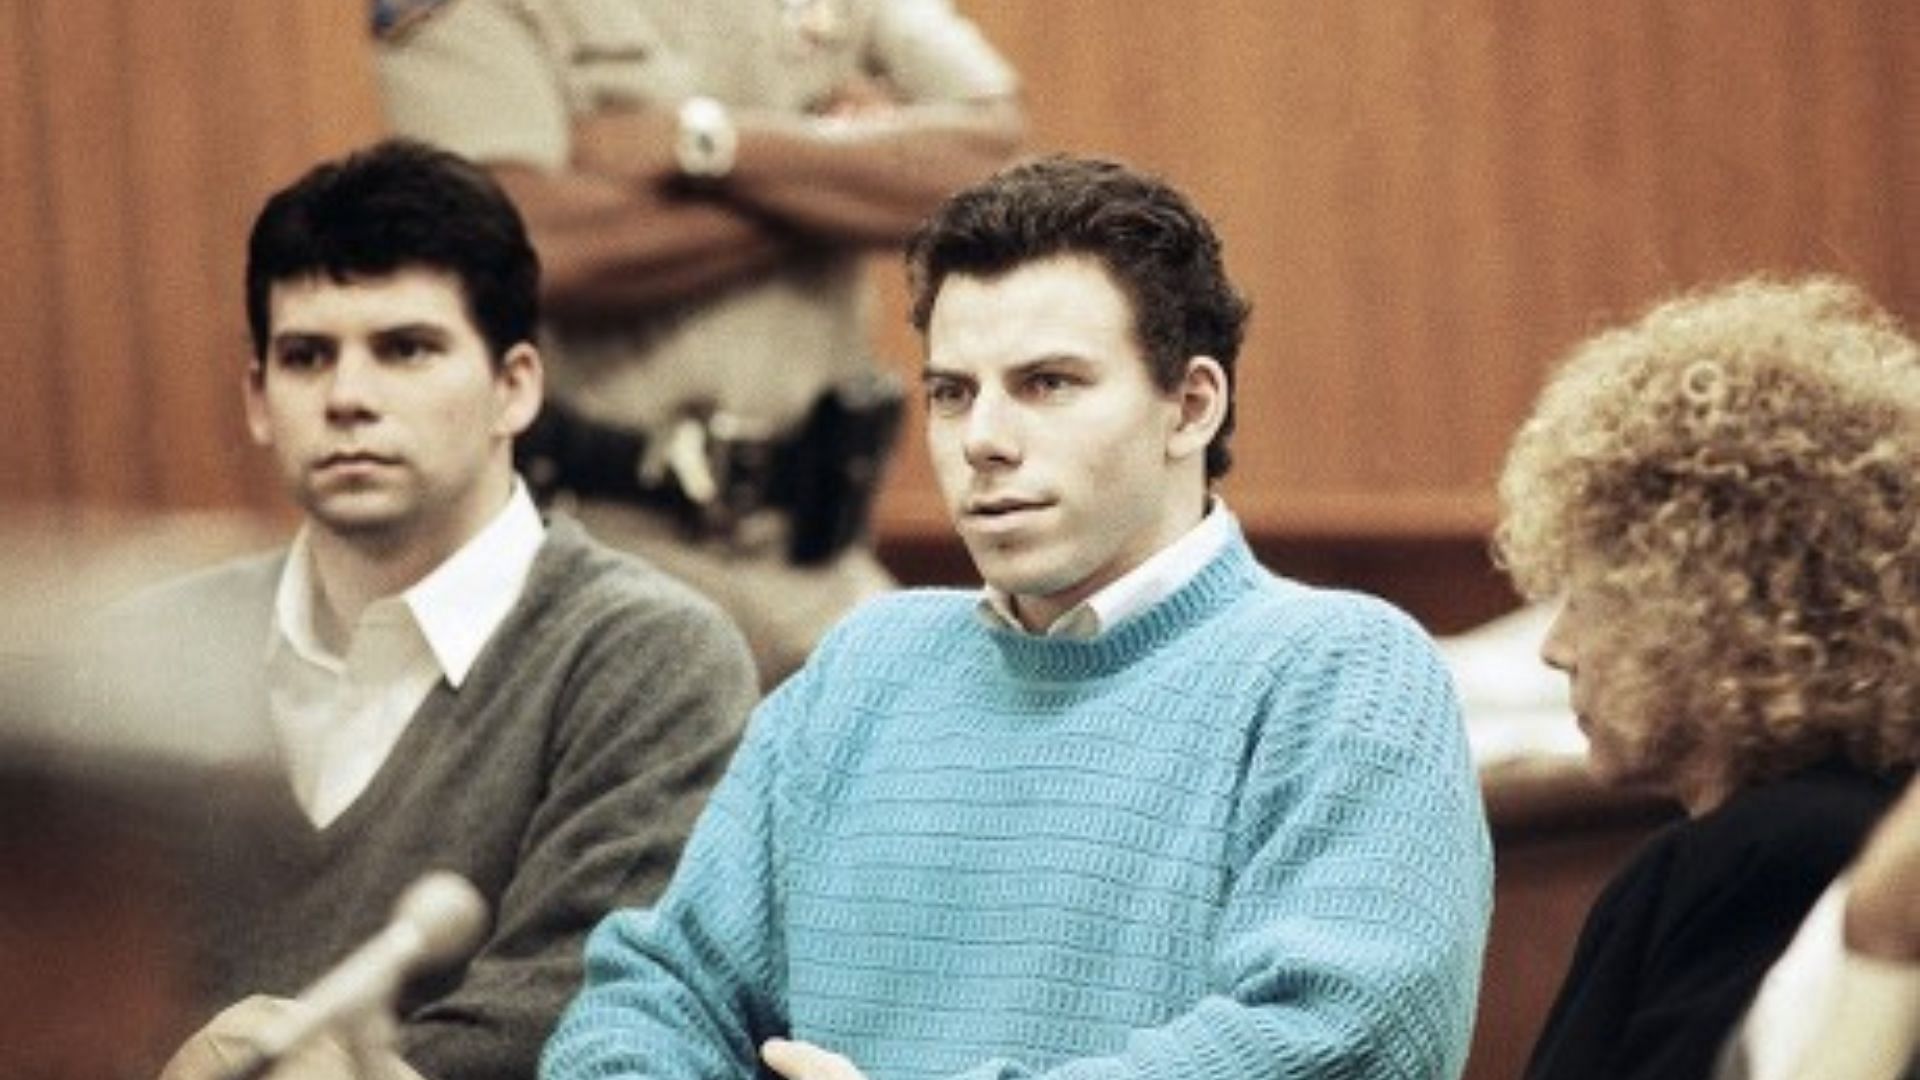 5 things to know about the startling Menendez Brothers case